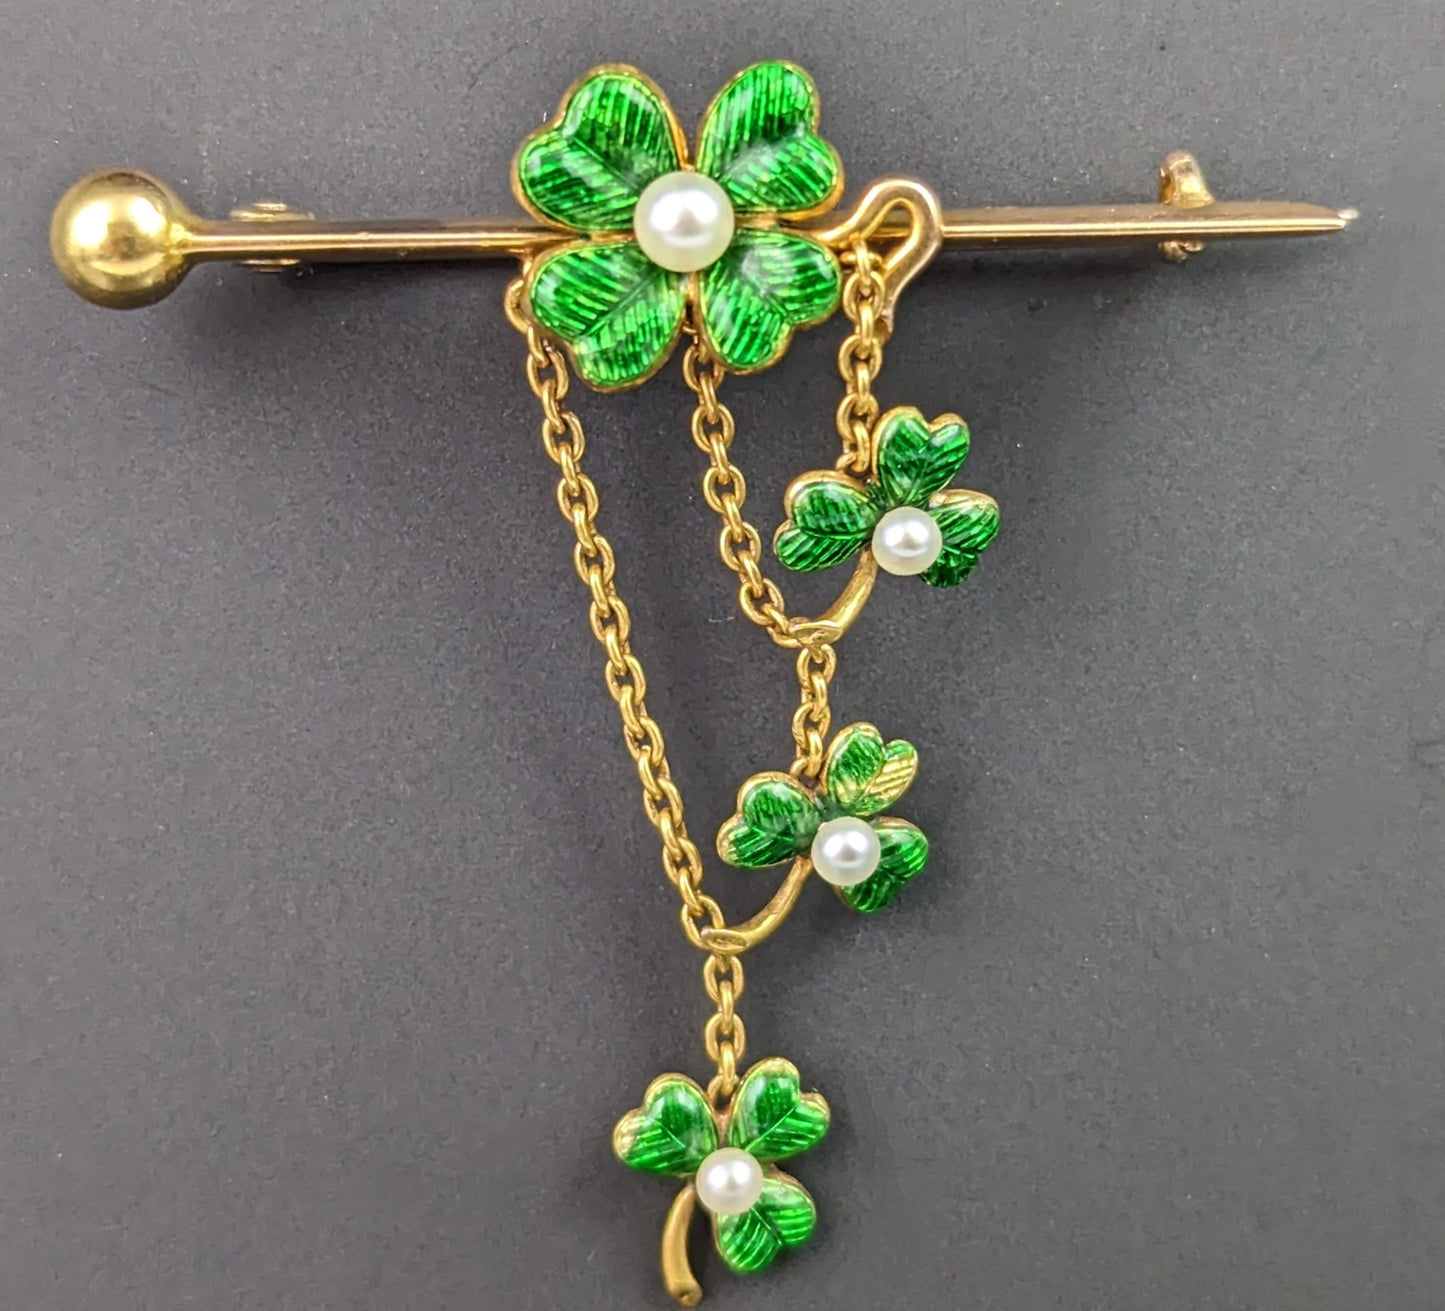 Antique Shamrock brooch, 15ct gold, Guilloche enamel and seed pearl